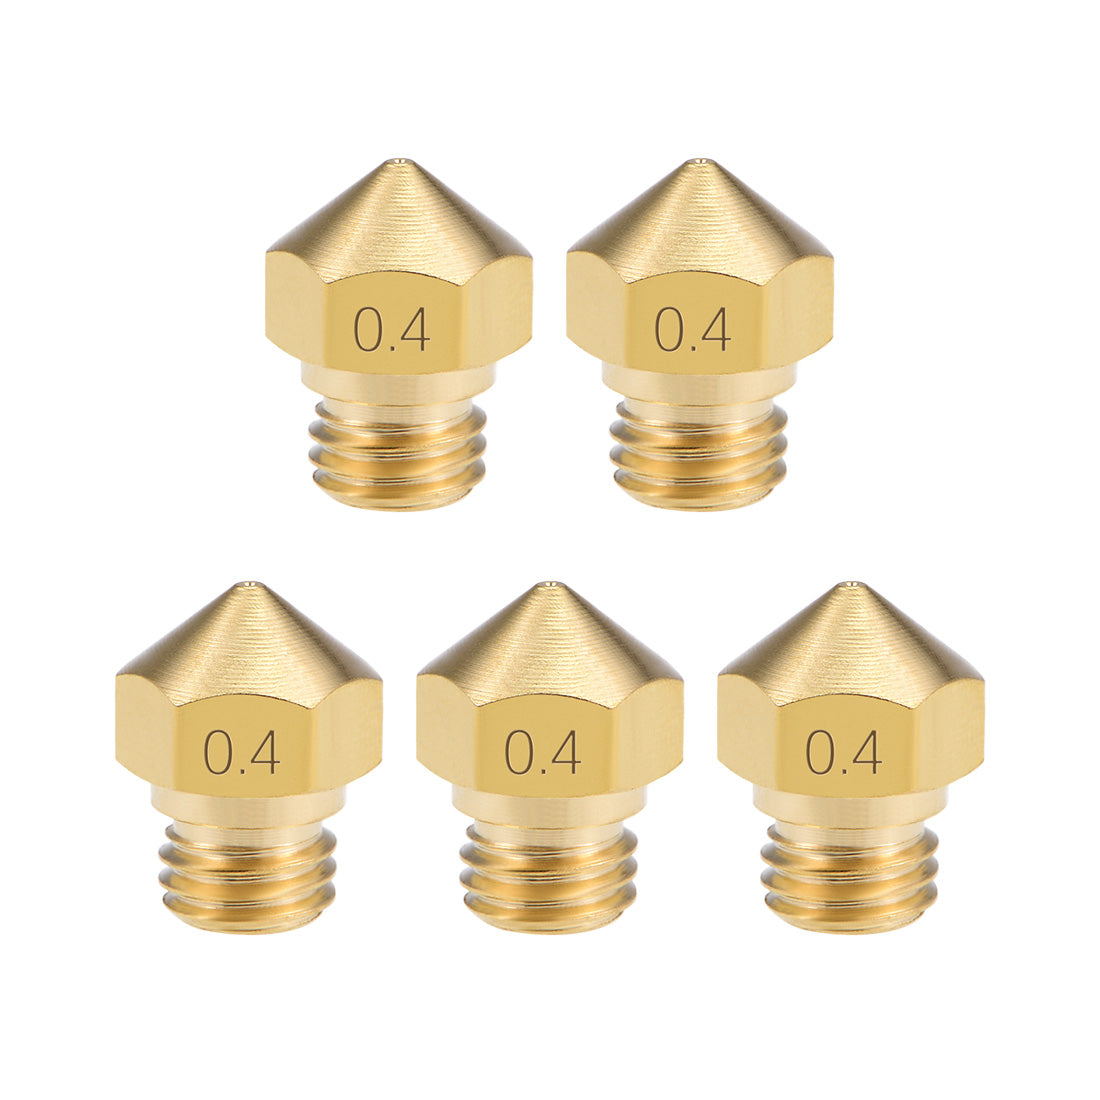 uxcell Uxcell 0.4mm 3D Printer Nozzle Head M7 Thread Replacement for MK10 1.75mm Extruder Print, Brass 5pcs